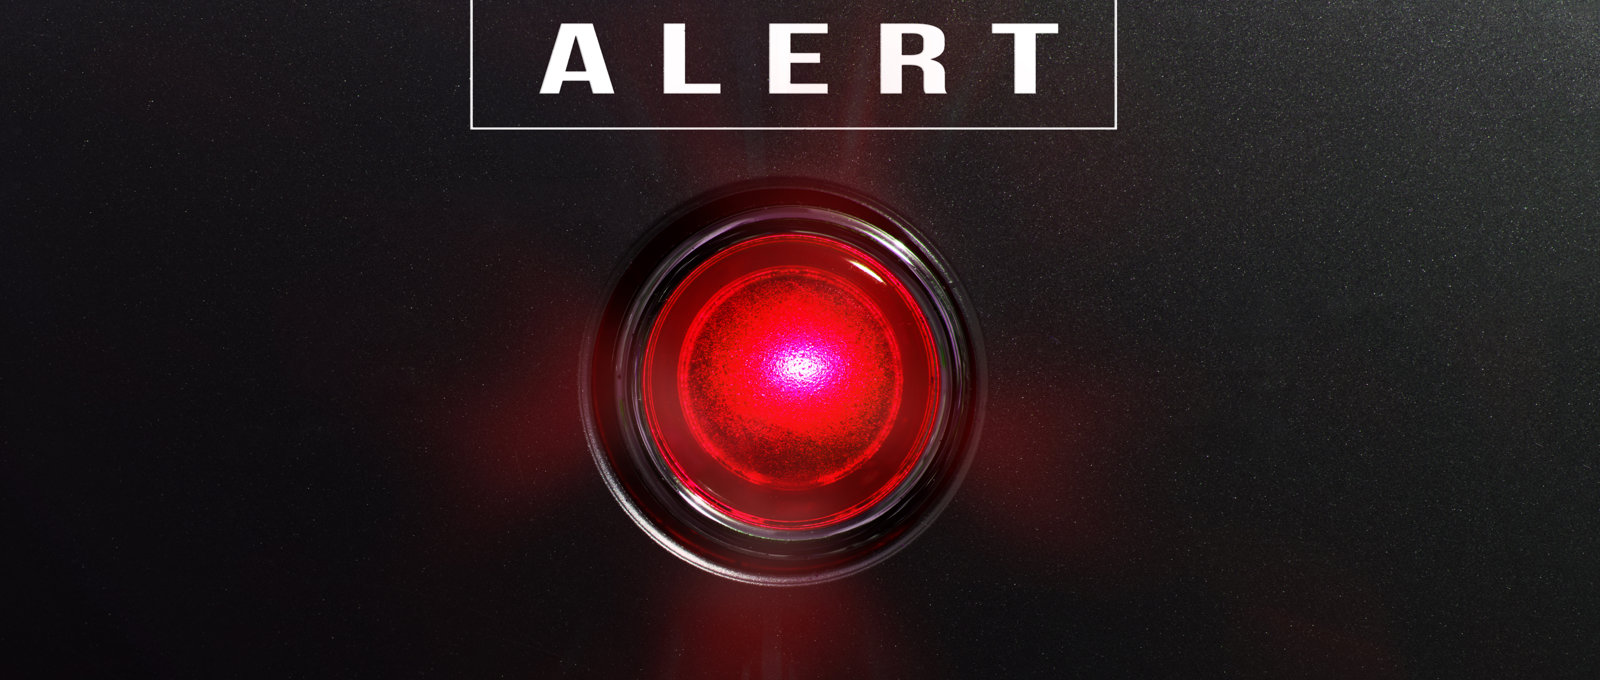 Photograph of a sinister glowing red light with the word 'alert' written above it